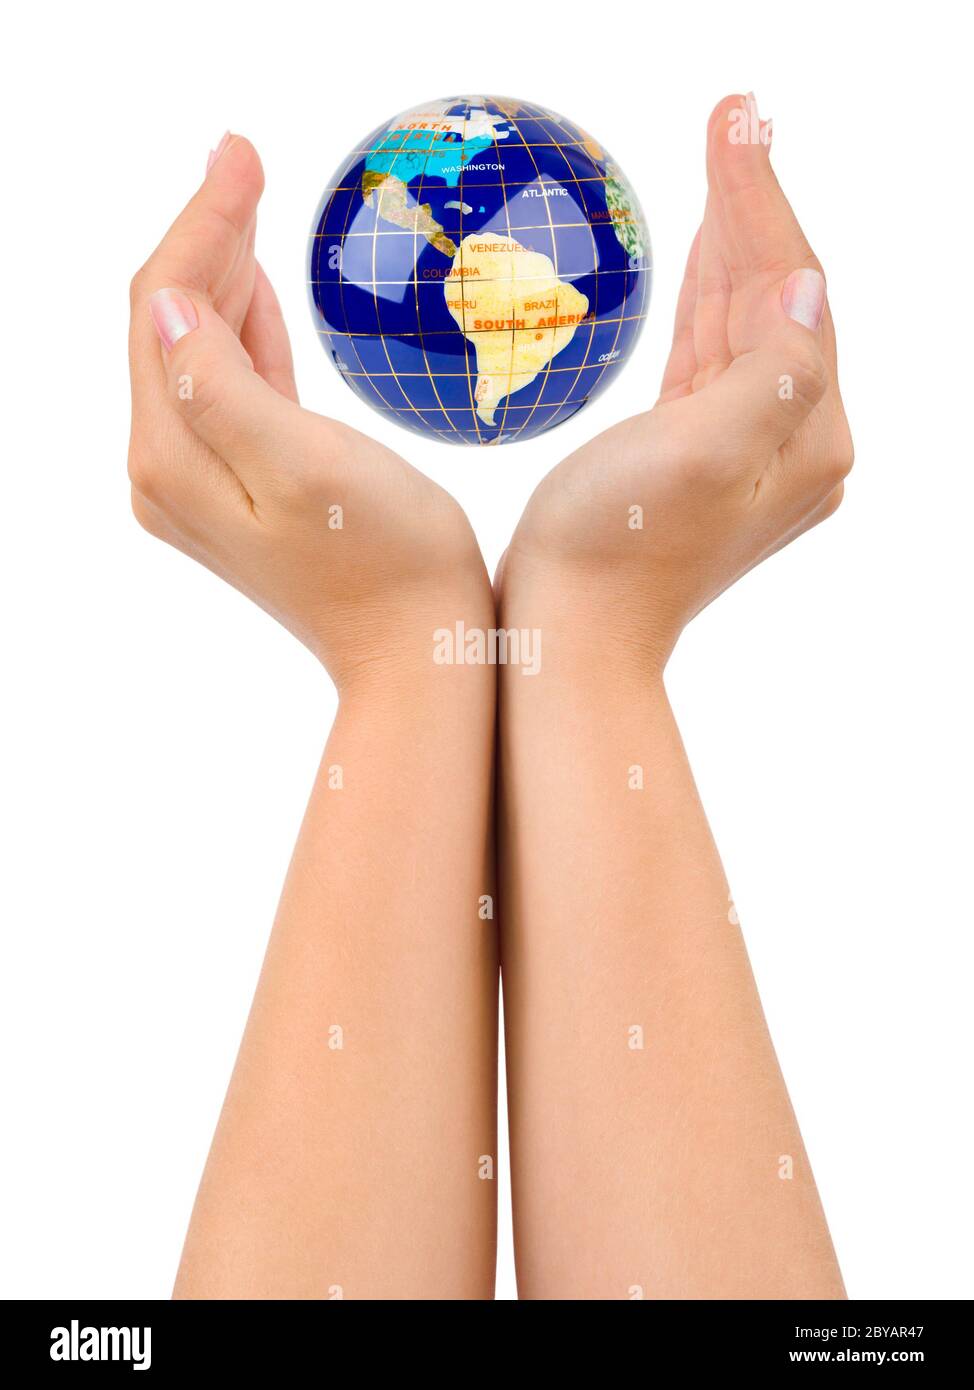 Earth in hands Stock Photo